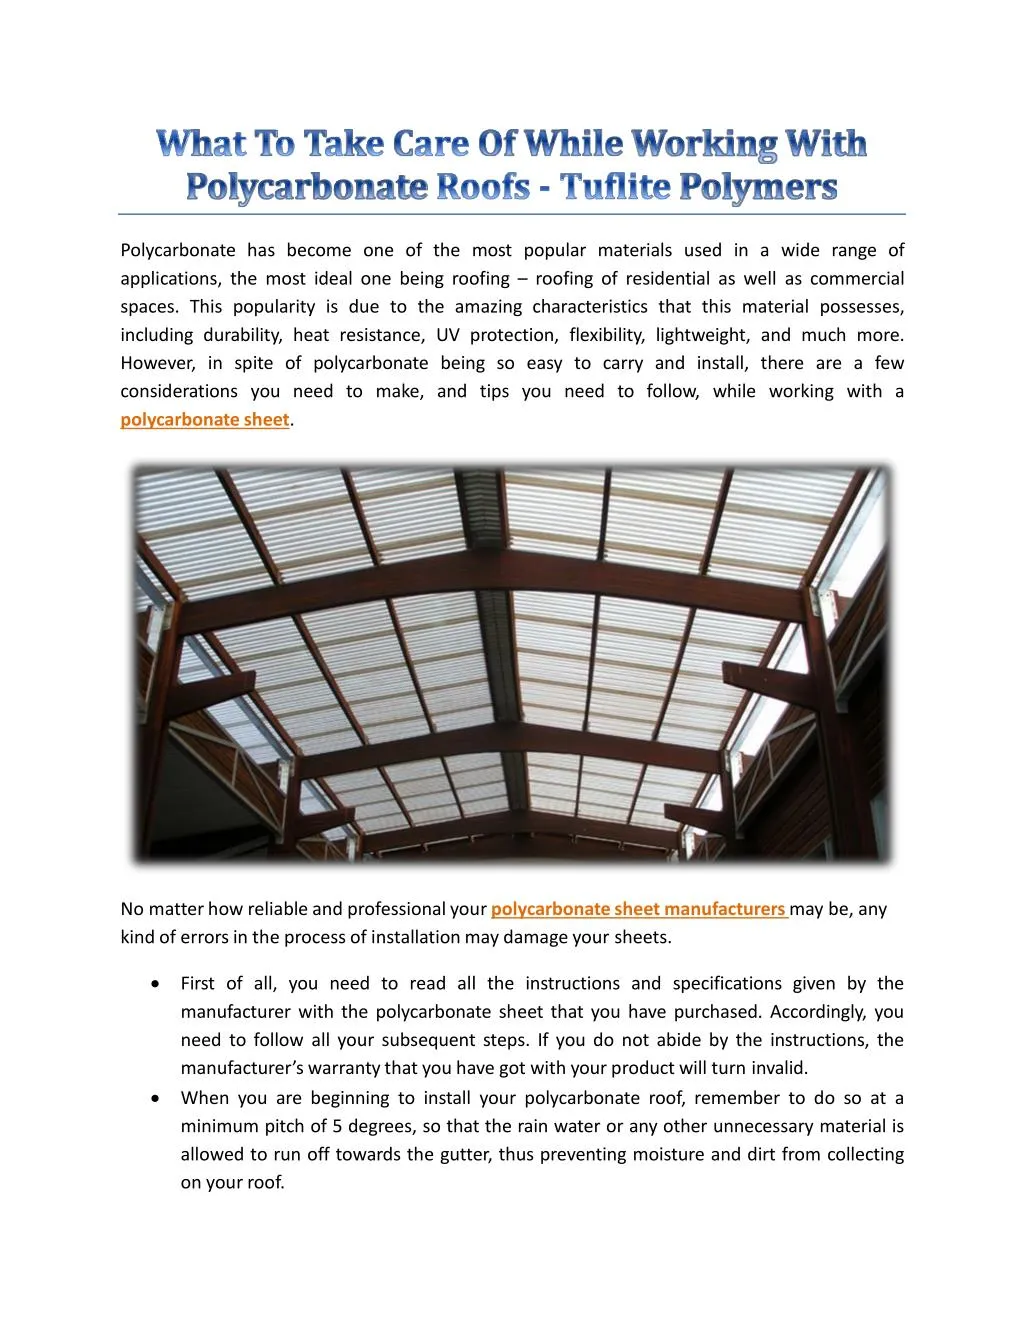 polycarbonate has become one of the most popular